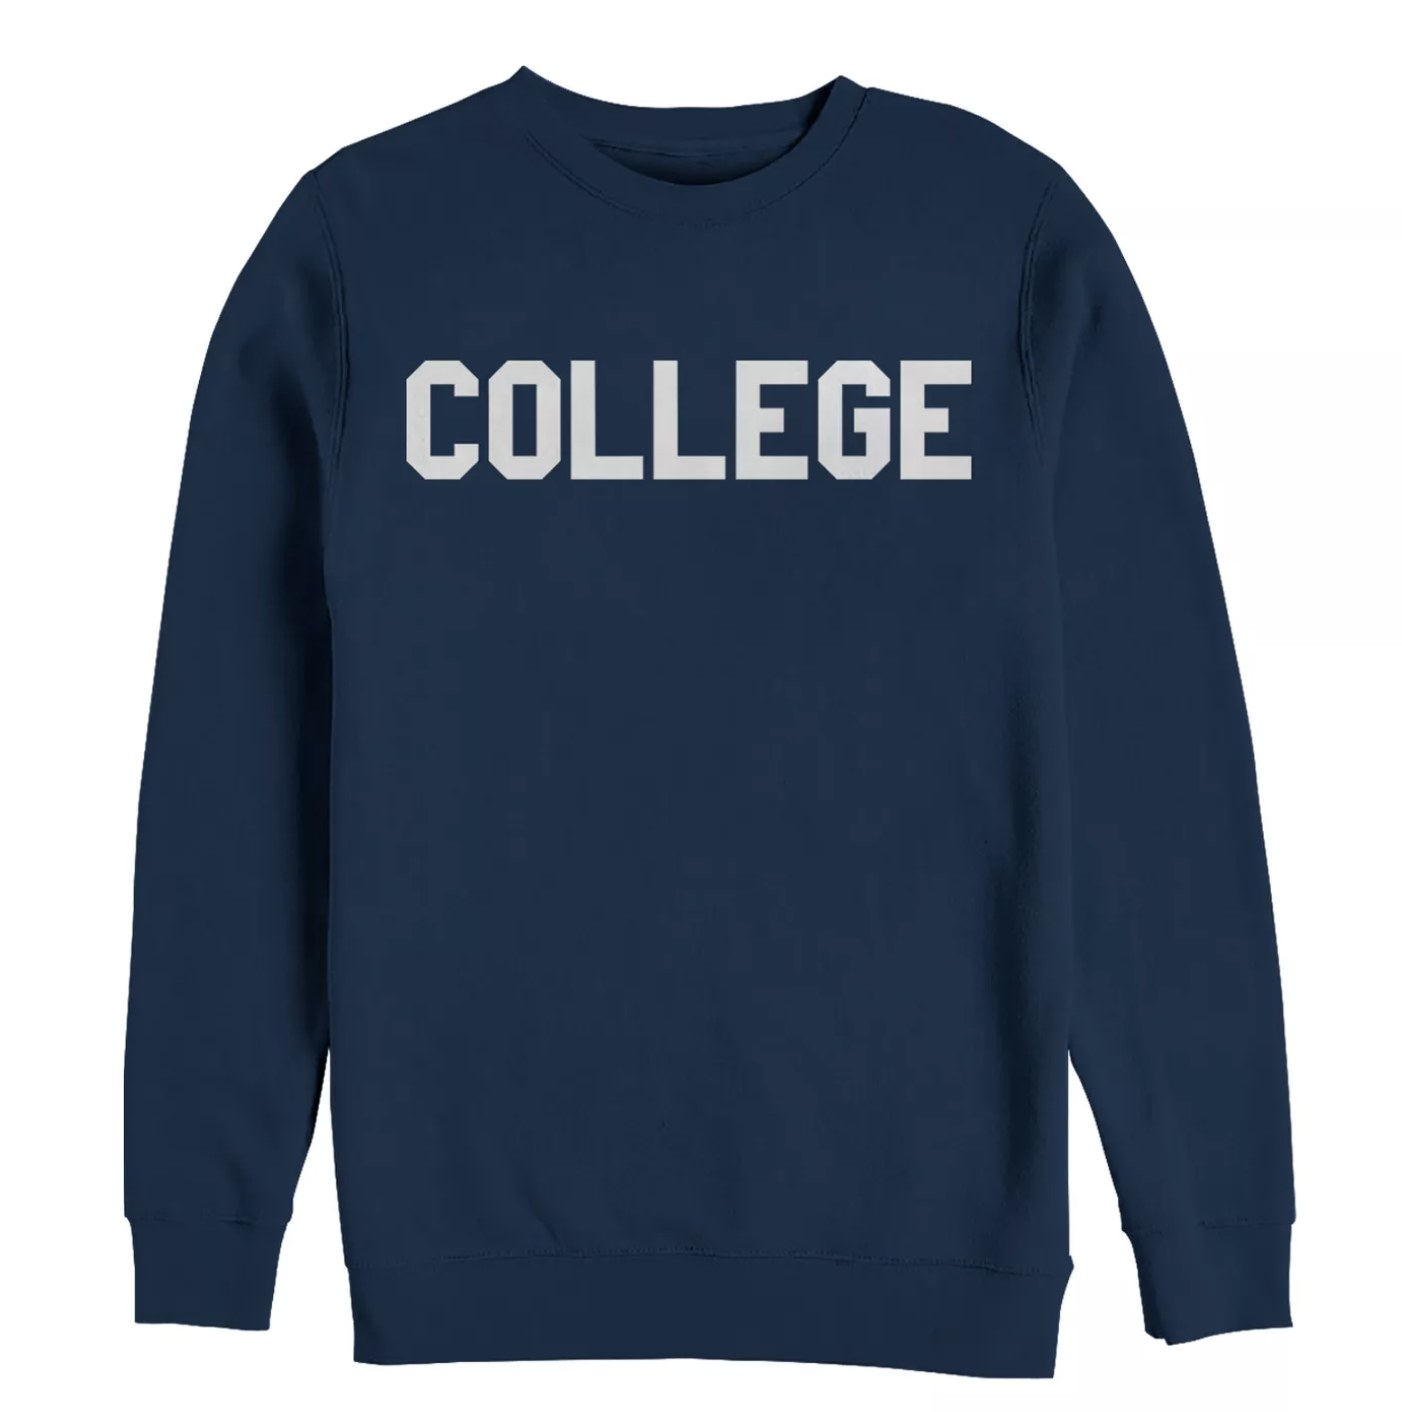 The navy blue sweatshirt with the college logo on it